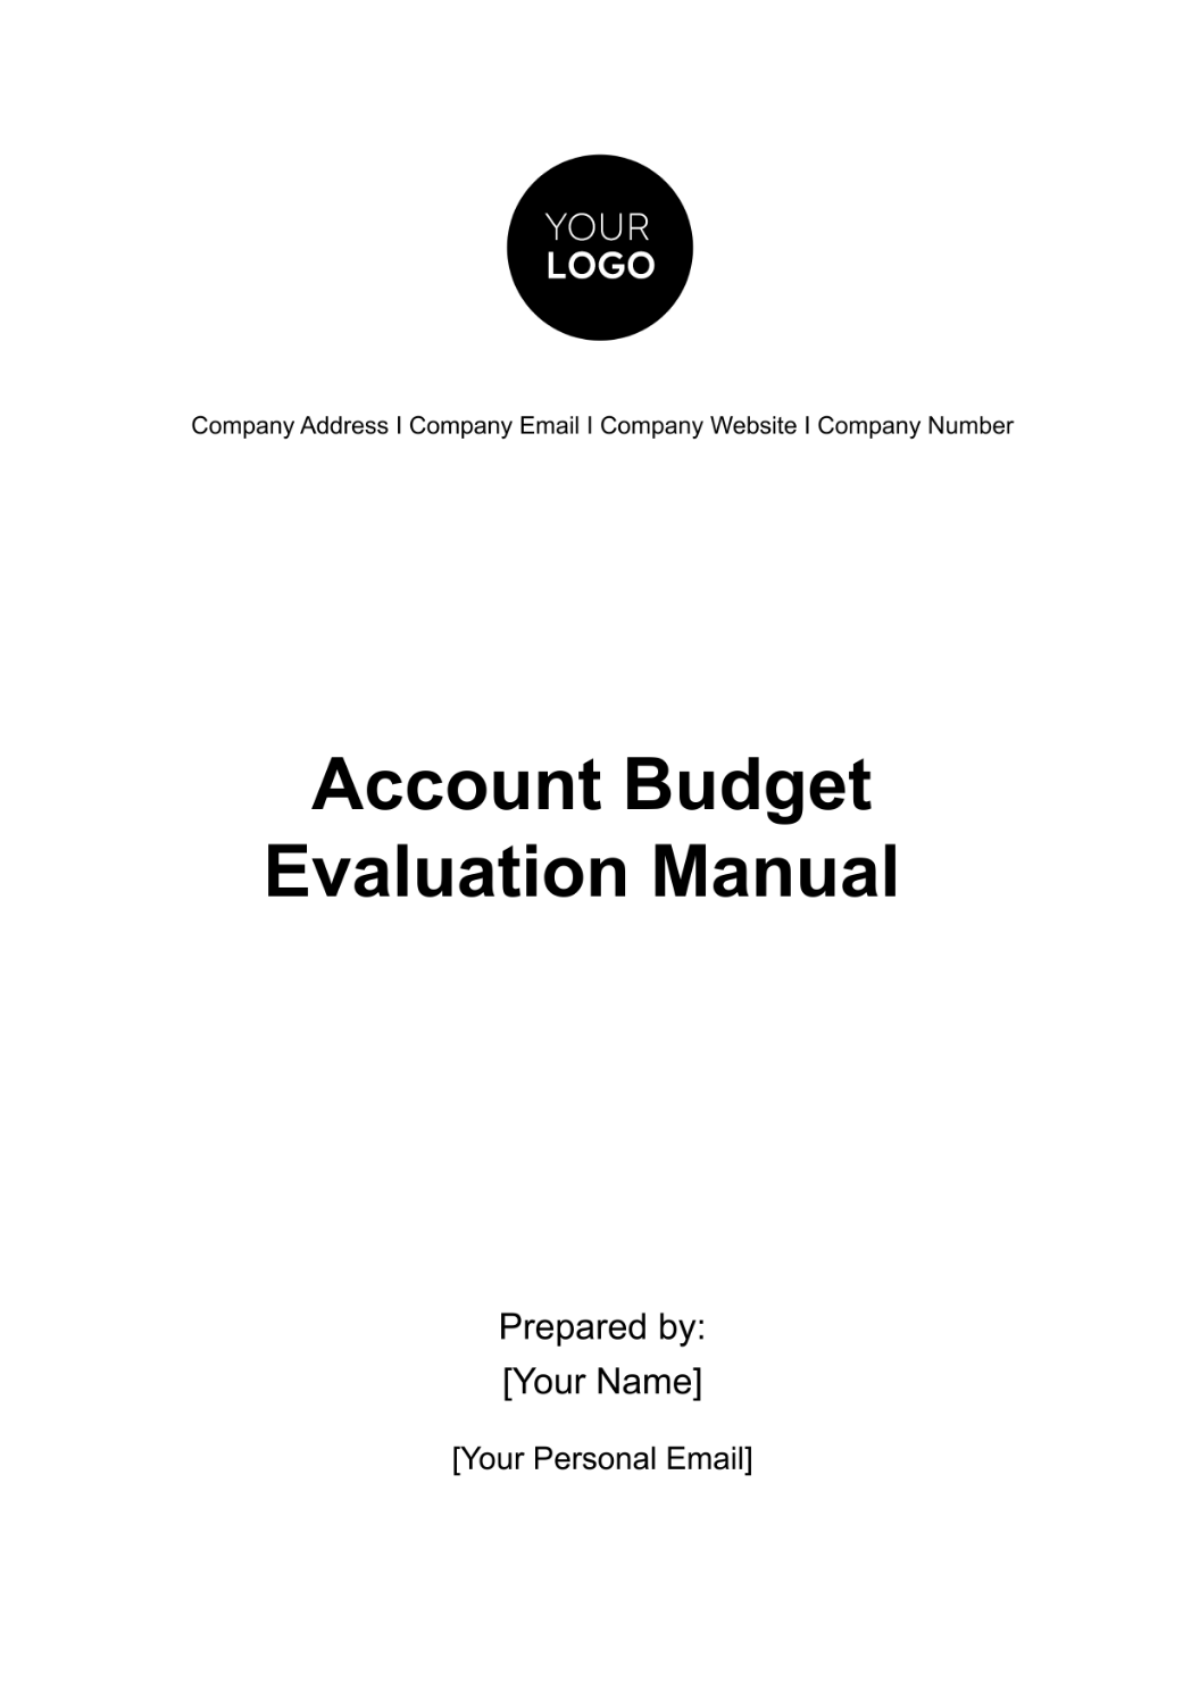 Account Budget Evaluation Manual Template